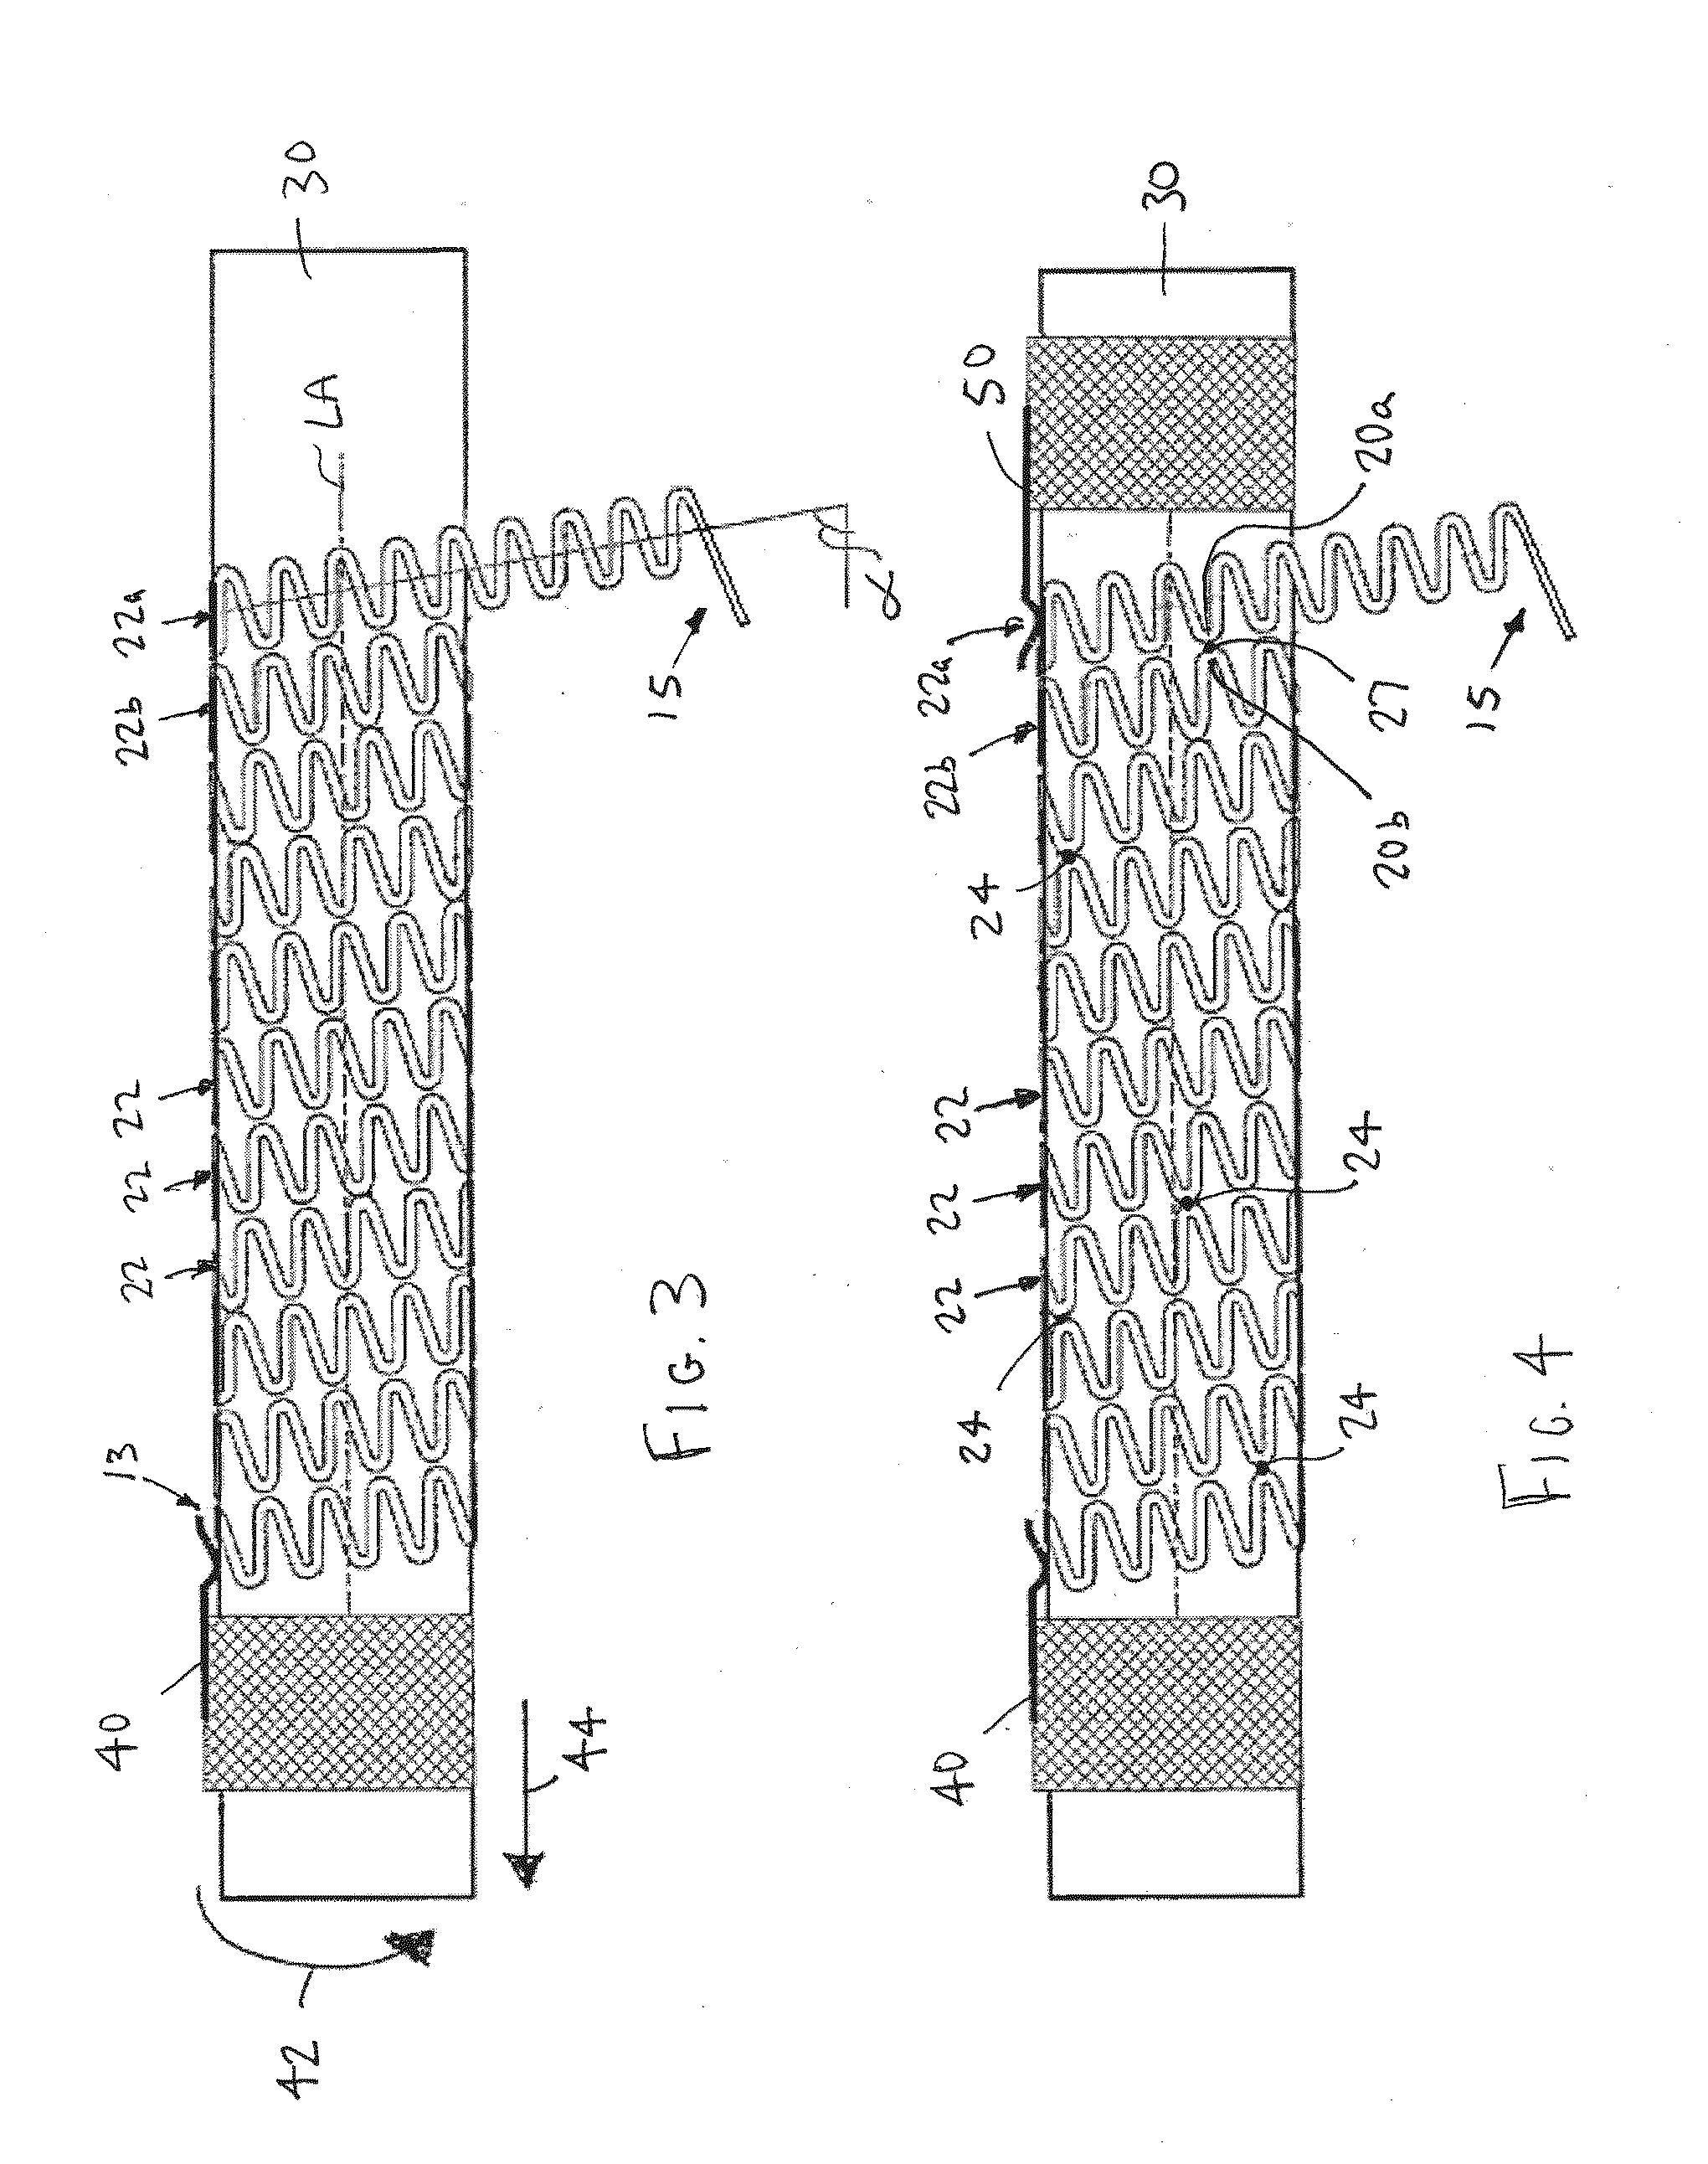 Method for forming a stent